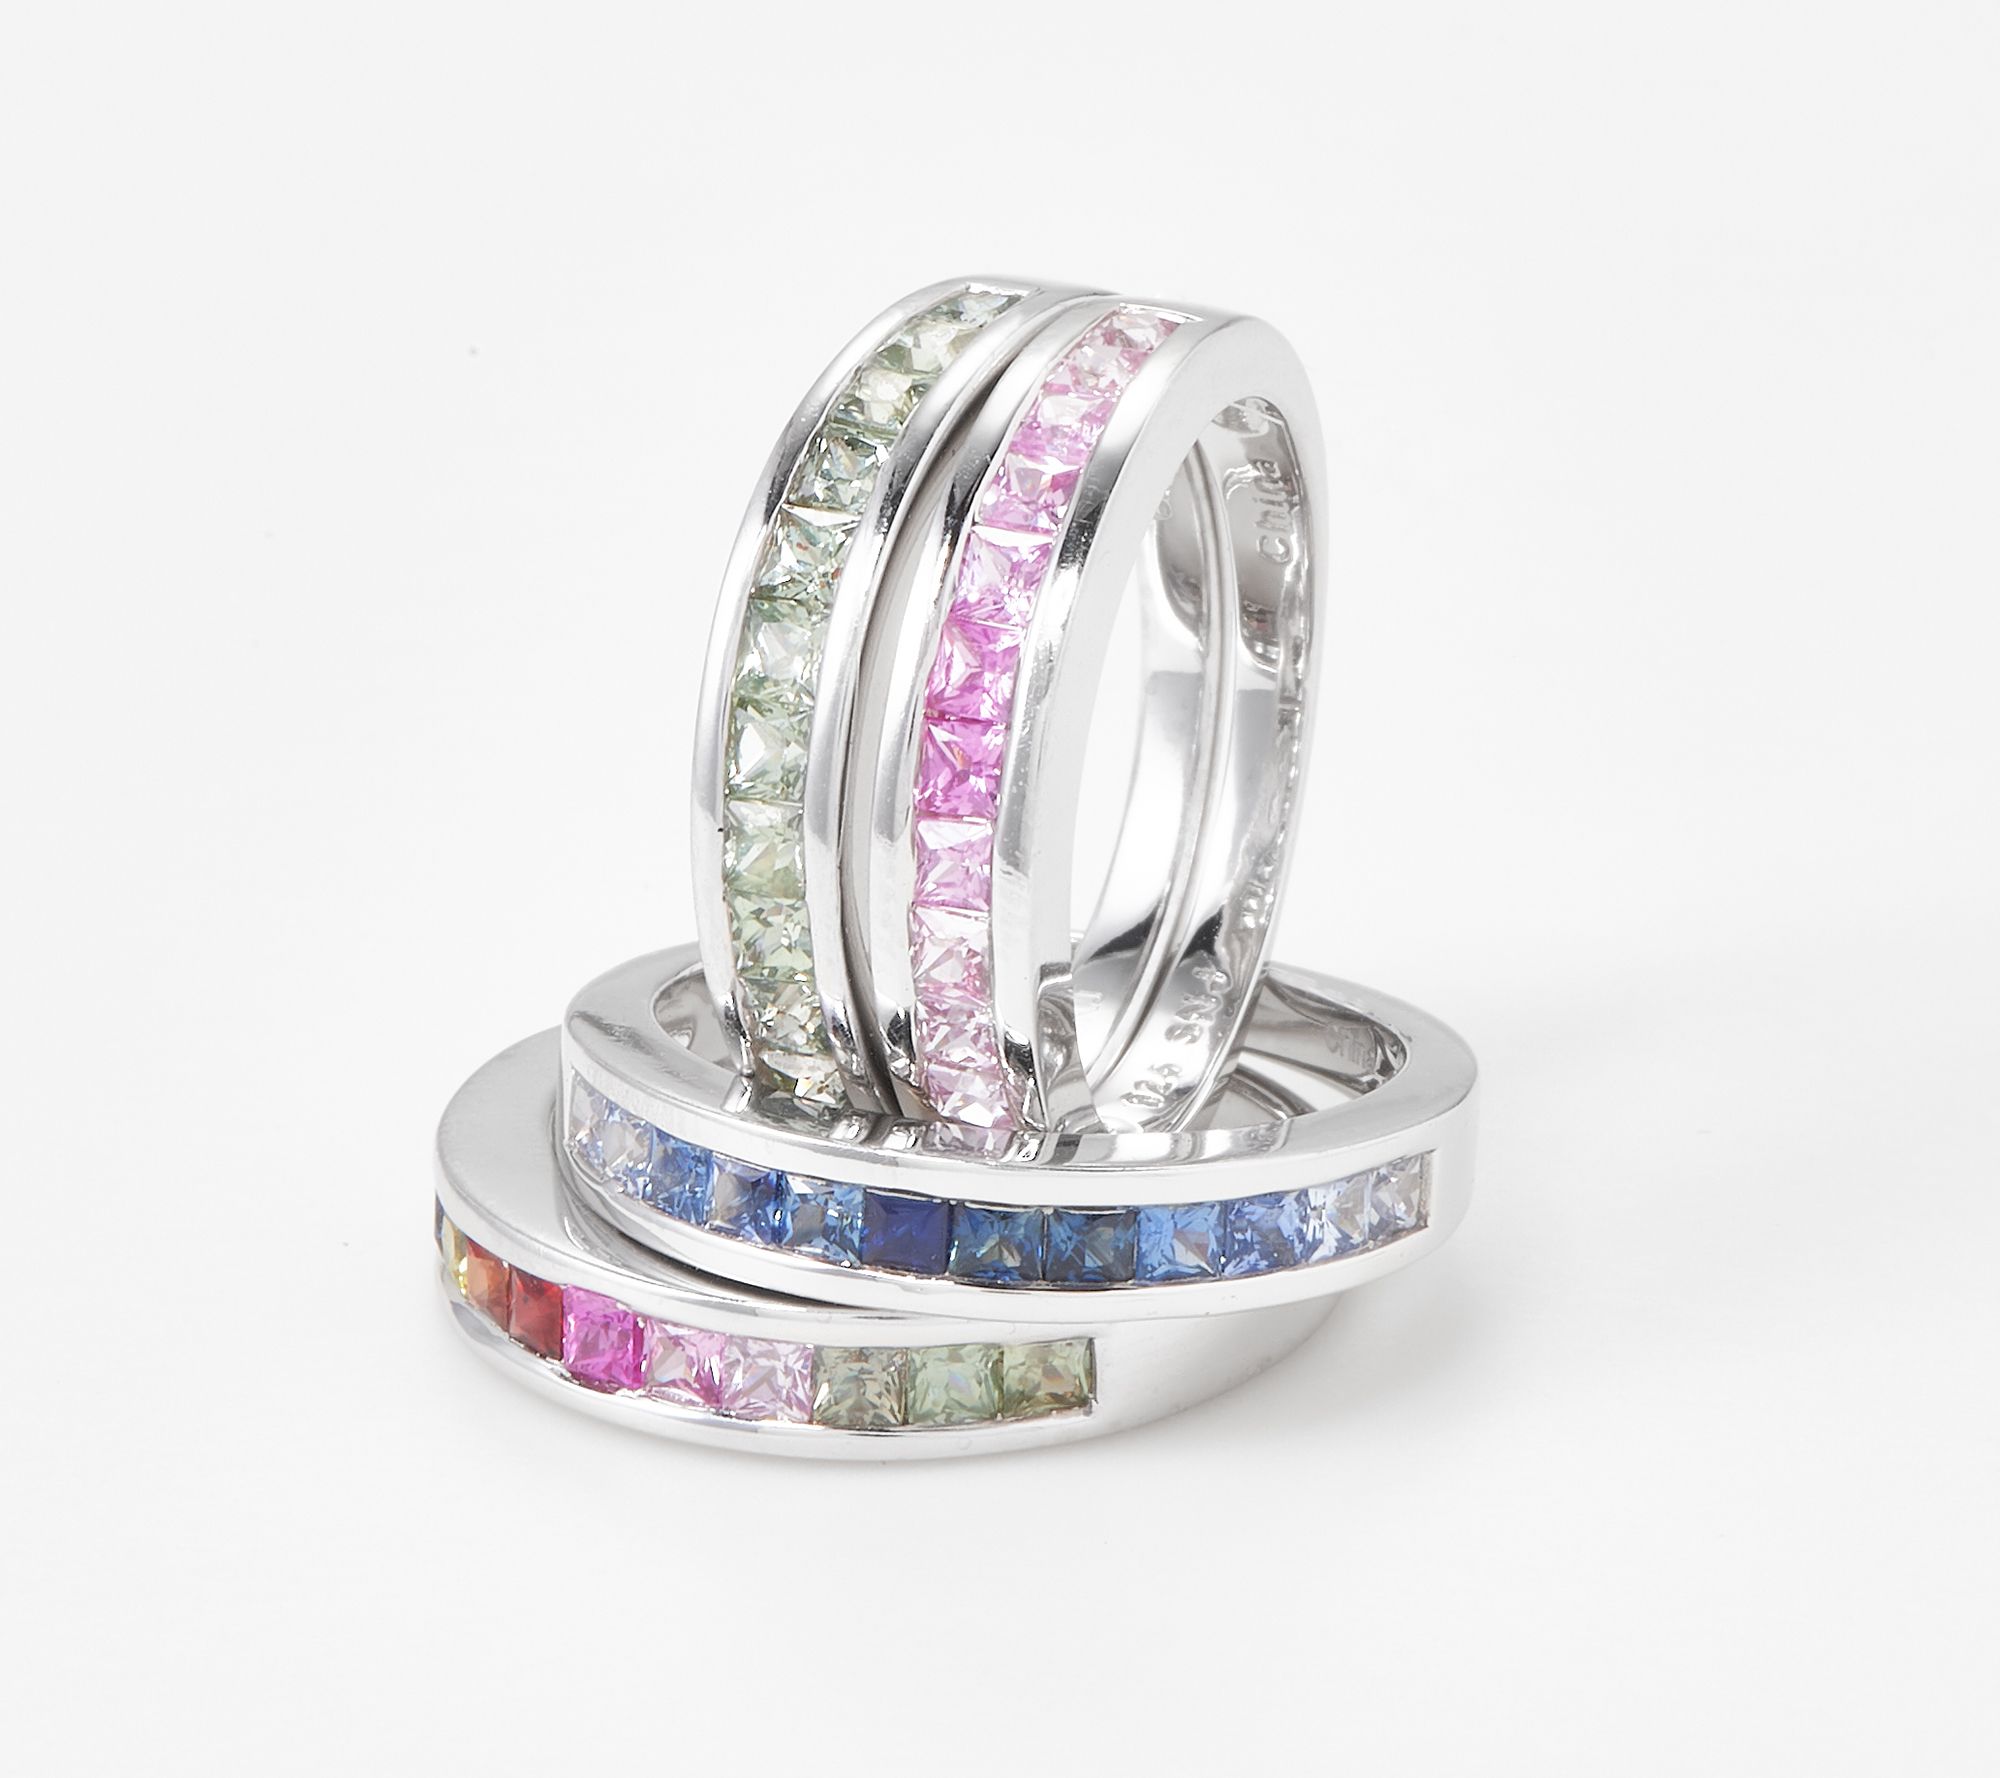 Channel Set Sapphire Band Ring, 0.70 cttw, Sterling Silver - QVC.com